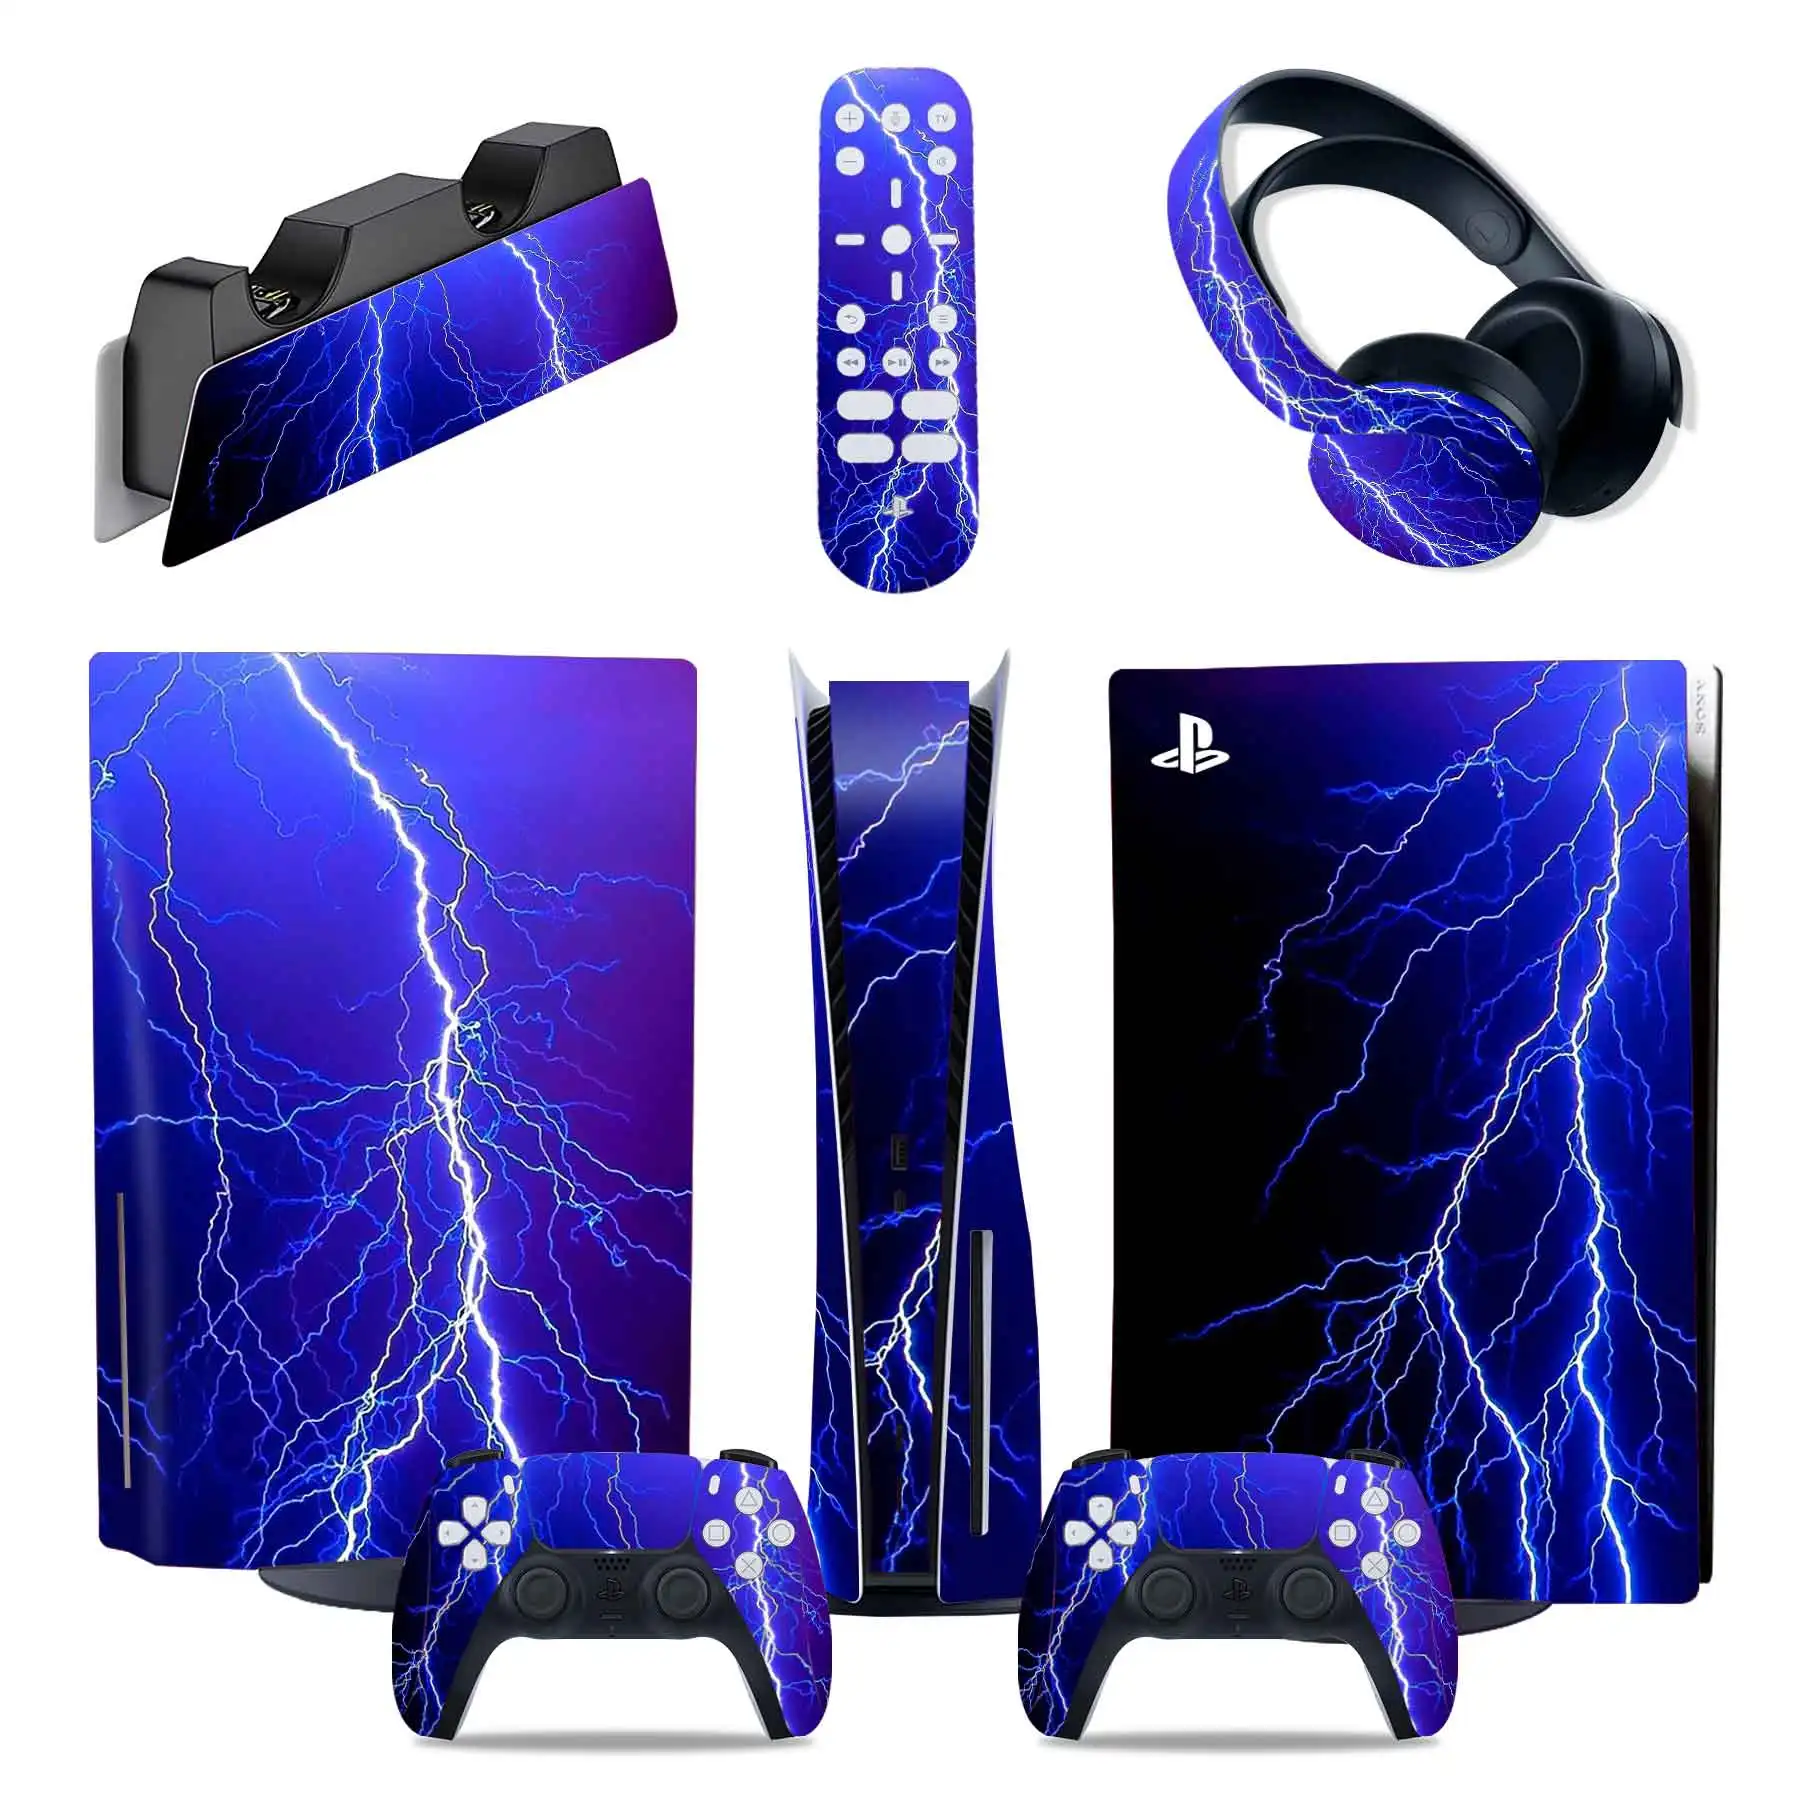 

The Galaxy Style PS5 Digital Edition Skin Sticker for Playstation 5 Console 2 Controllers Decal Vinyl Protective Skins Style 2